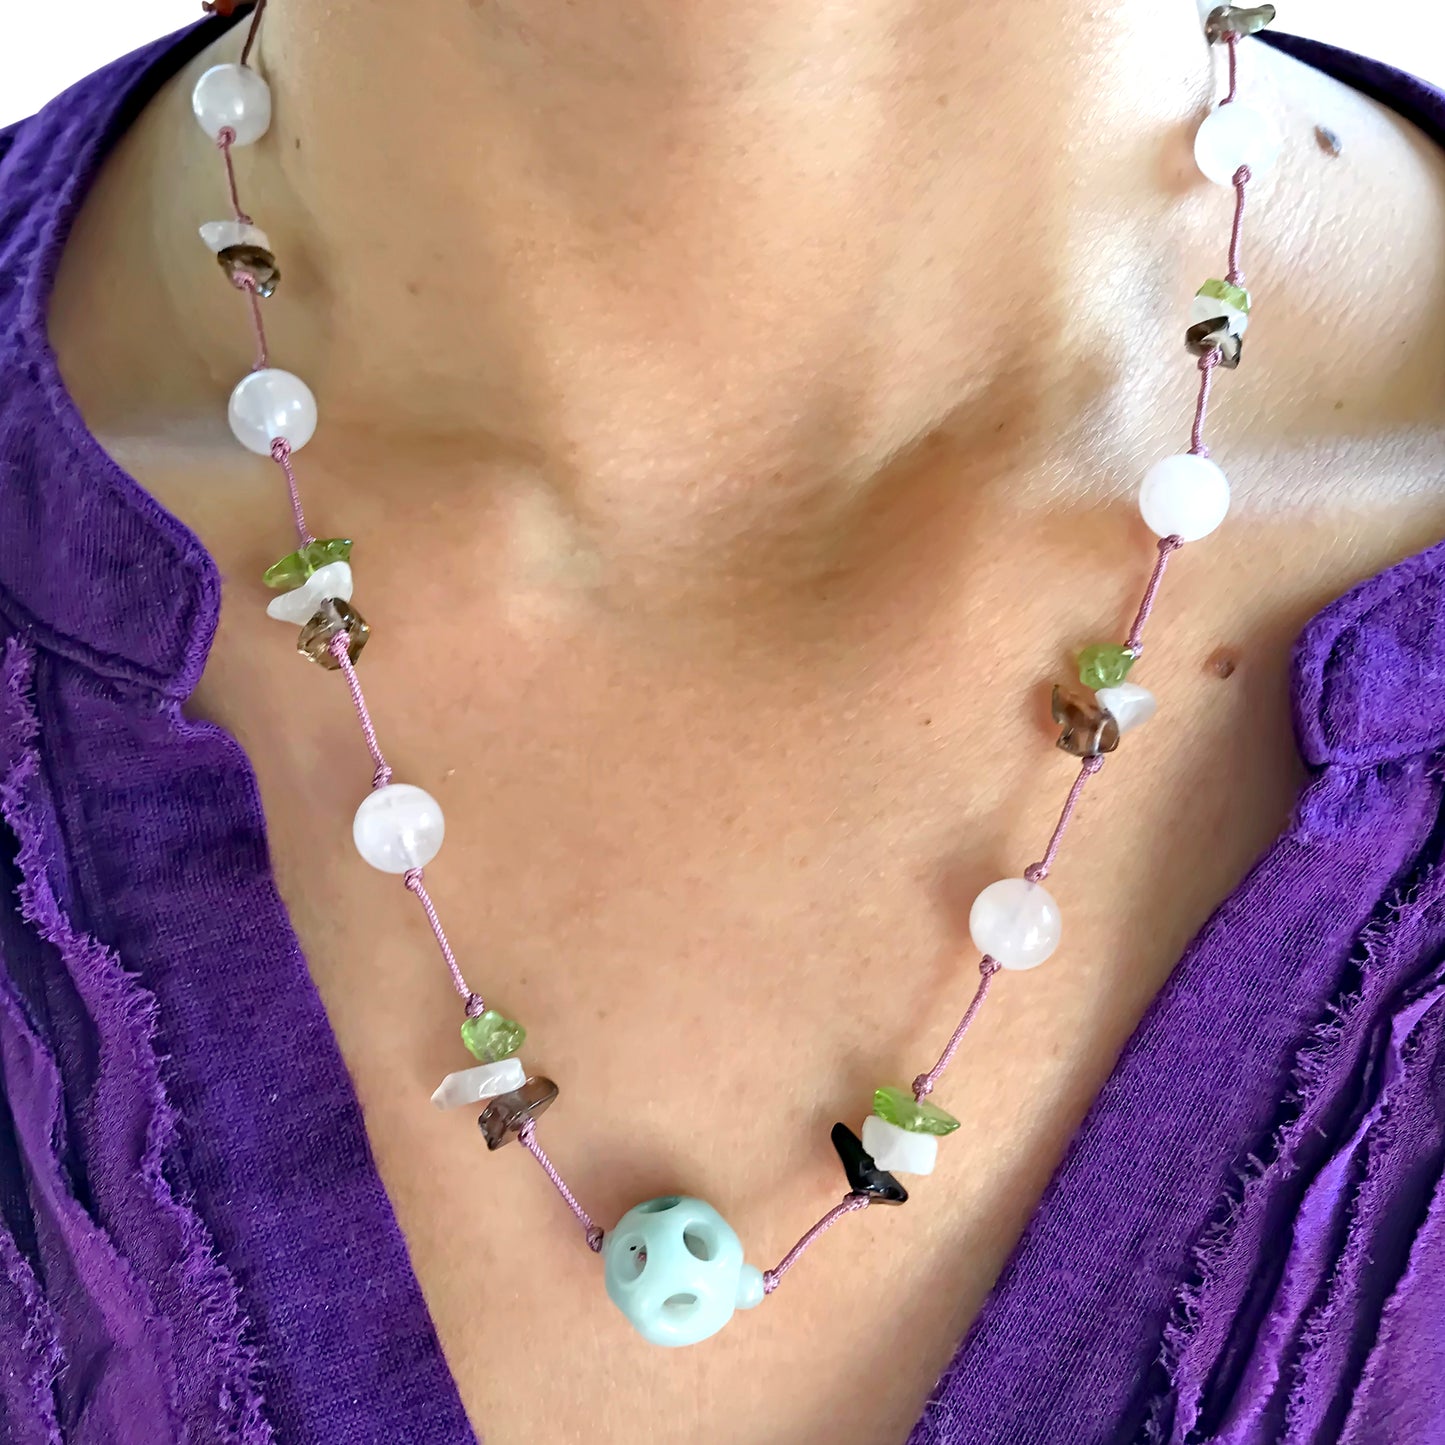 Add an Elegant Touch with this Handcrafted Bead Jade Gemstone Necklace